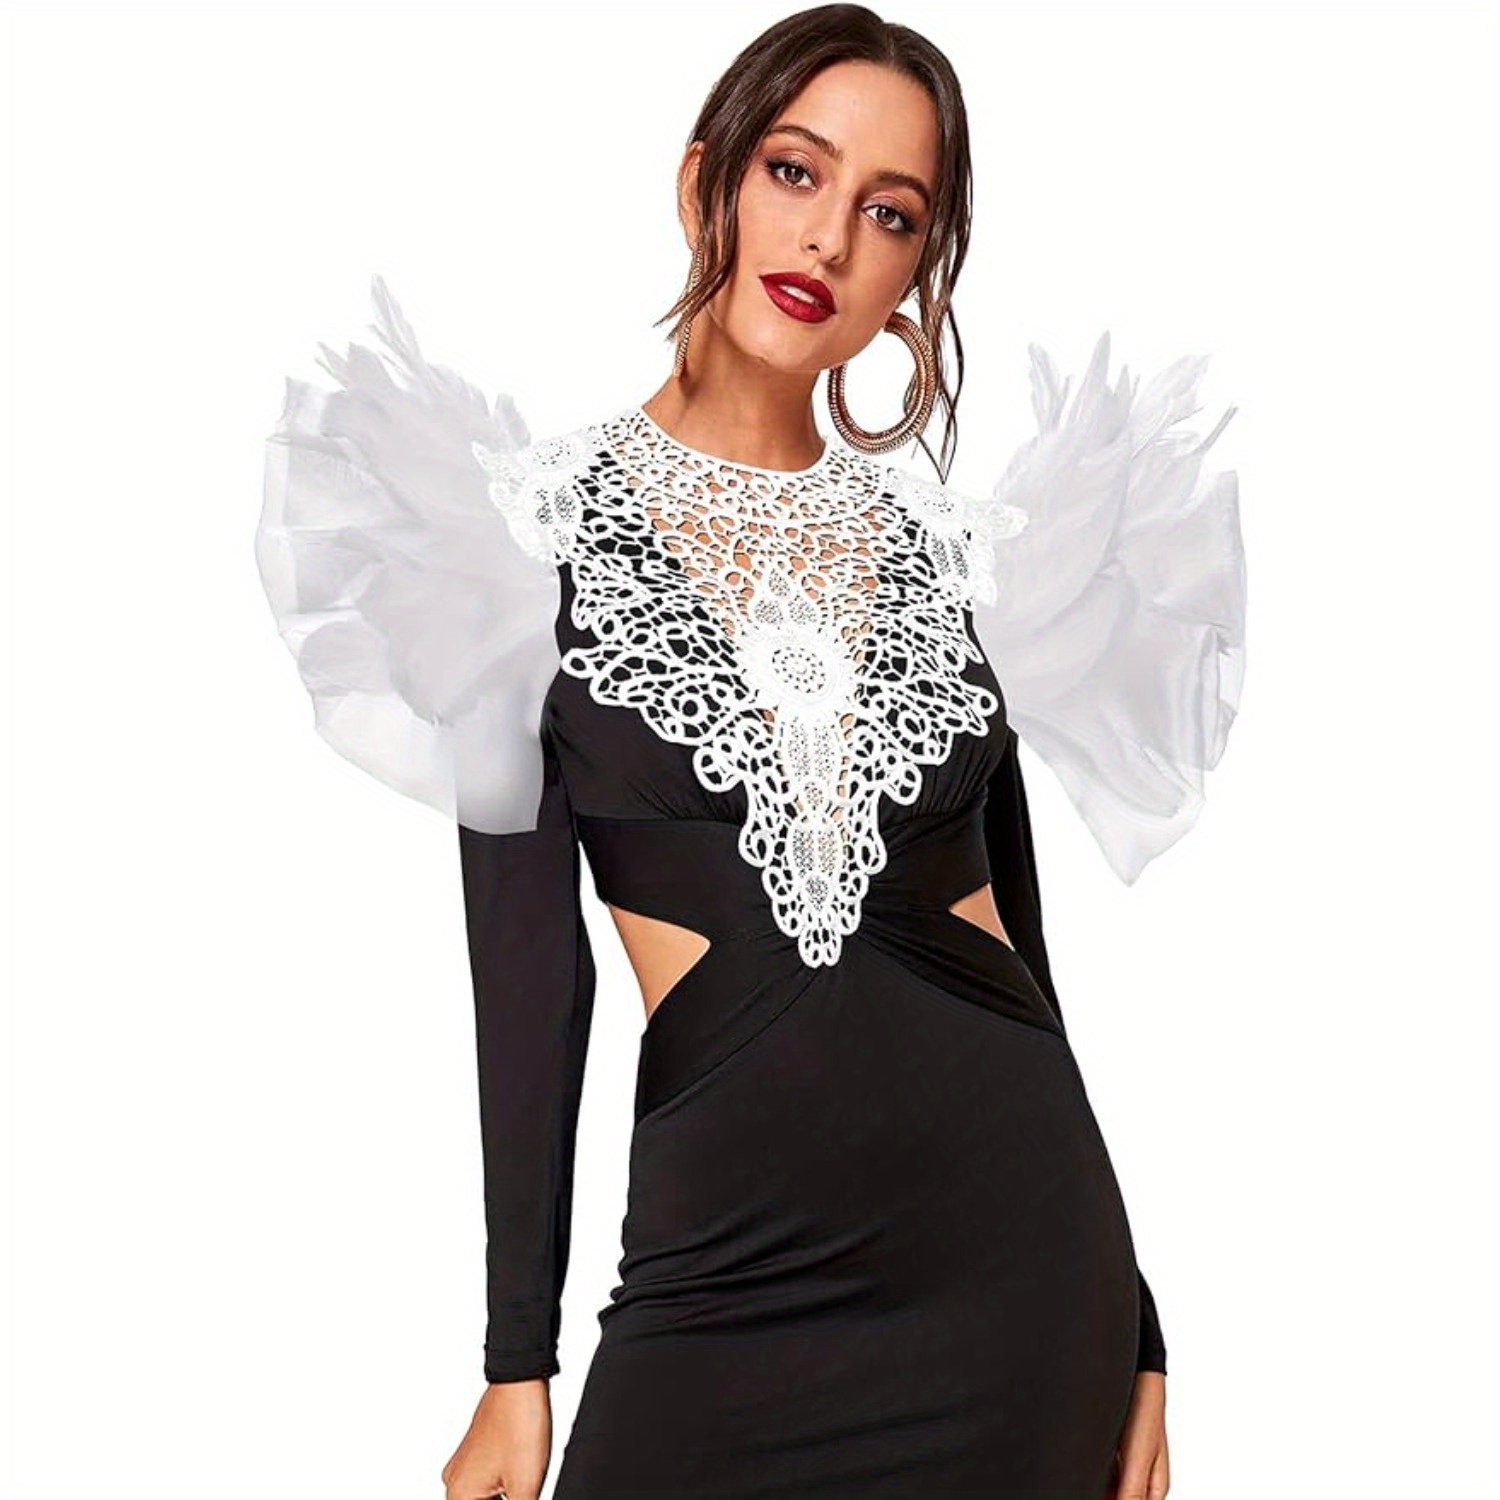 Angel Wings White Feather Stage Wing Luminous Style